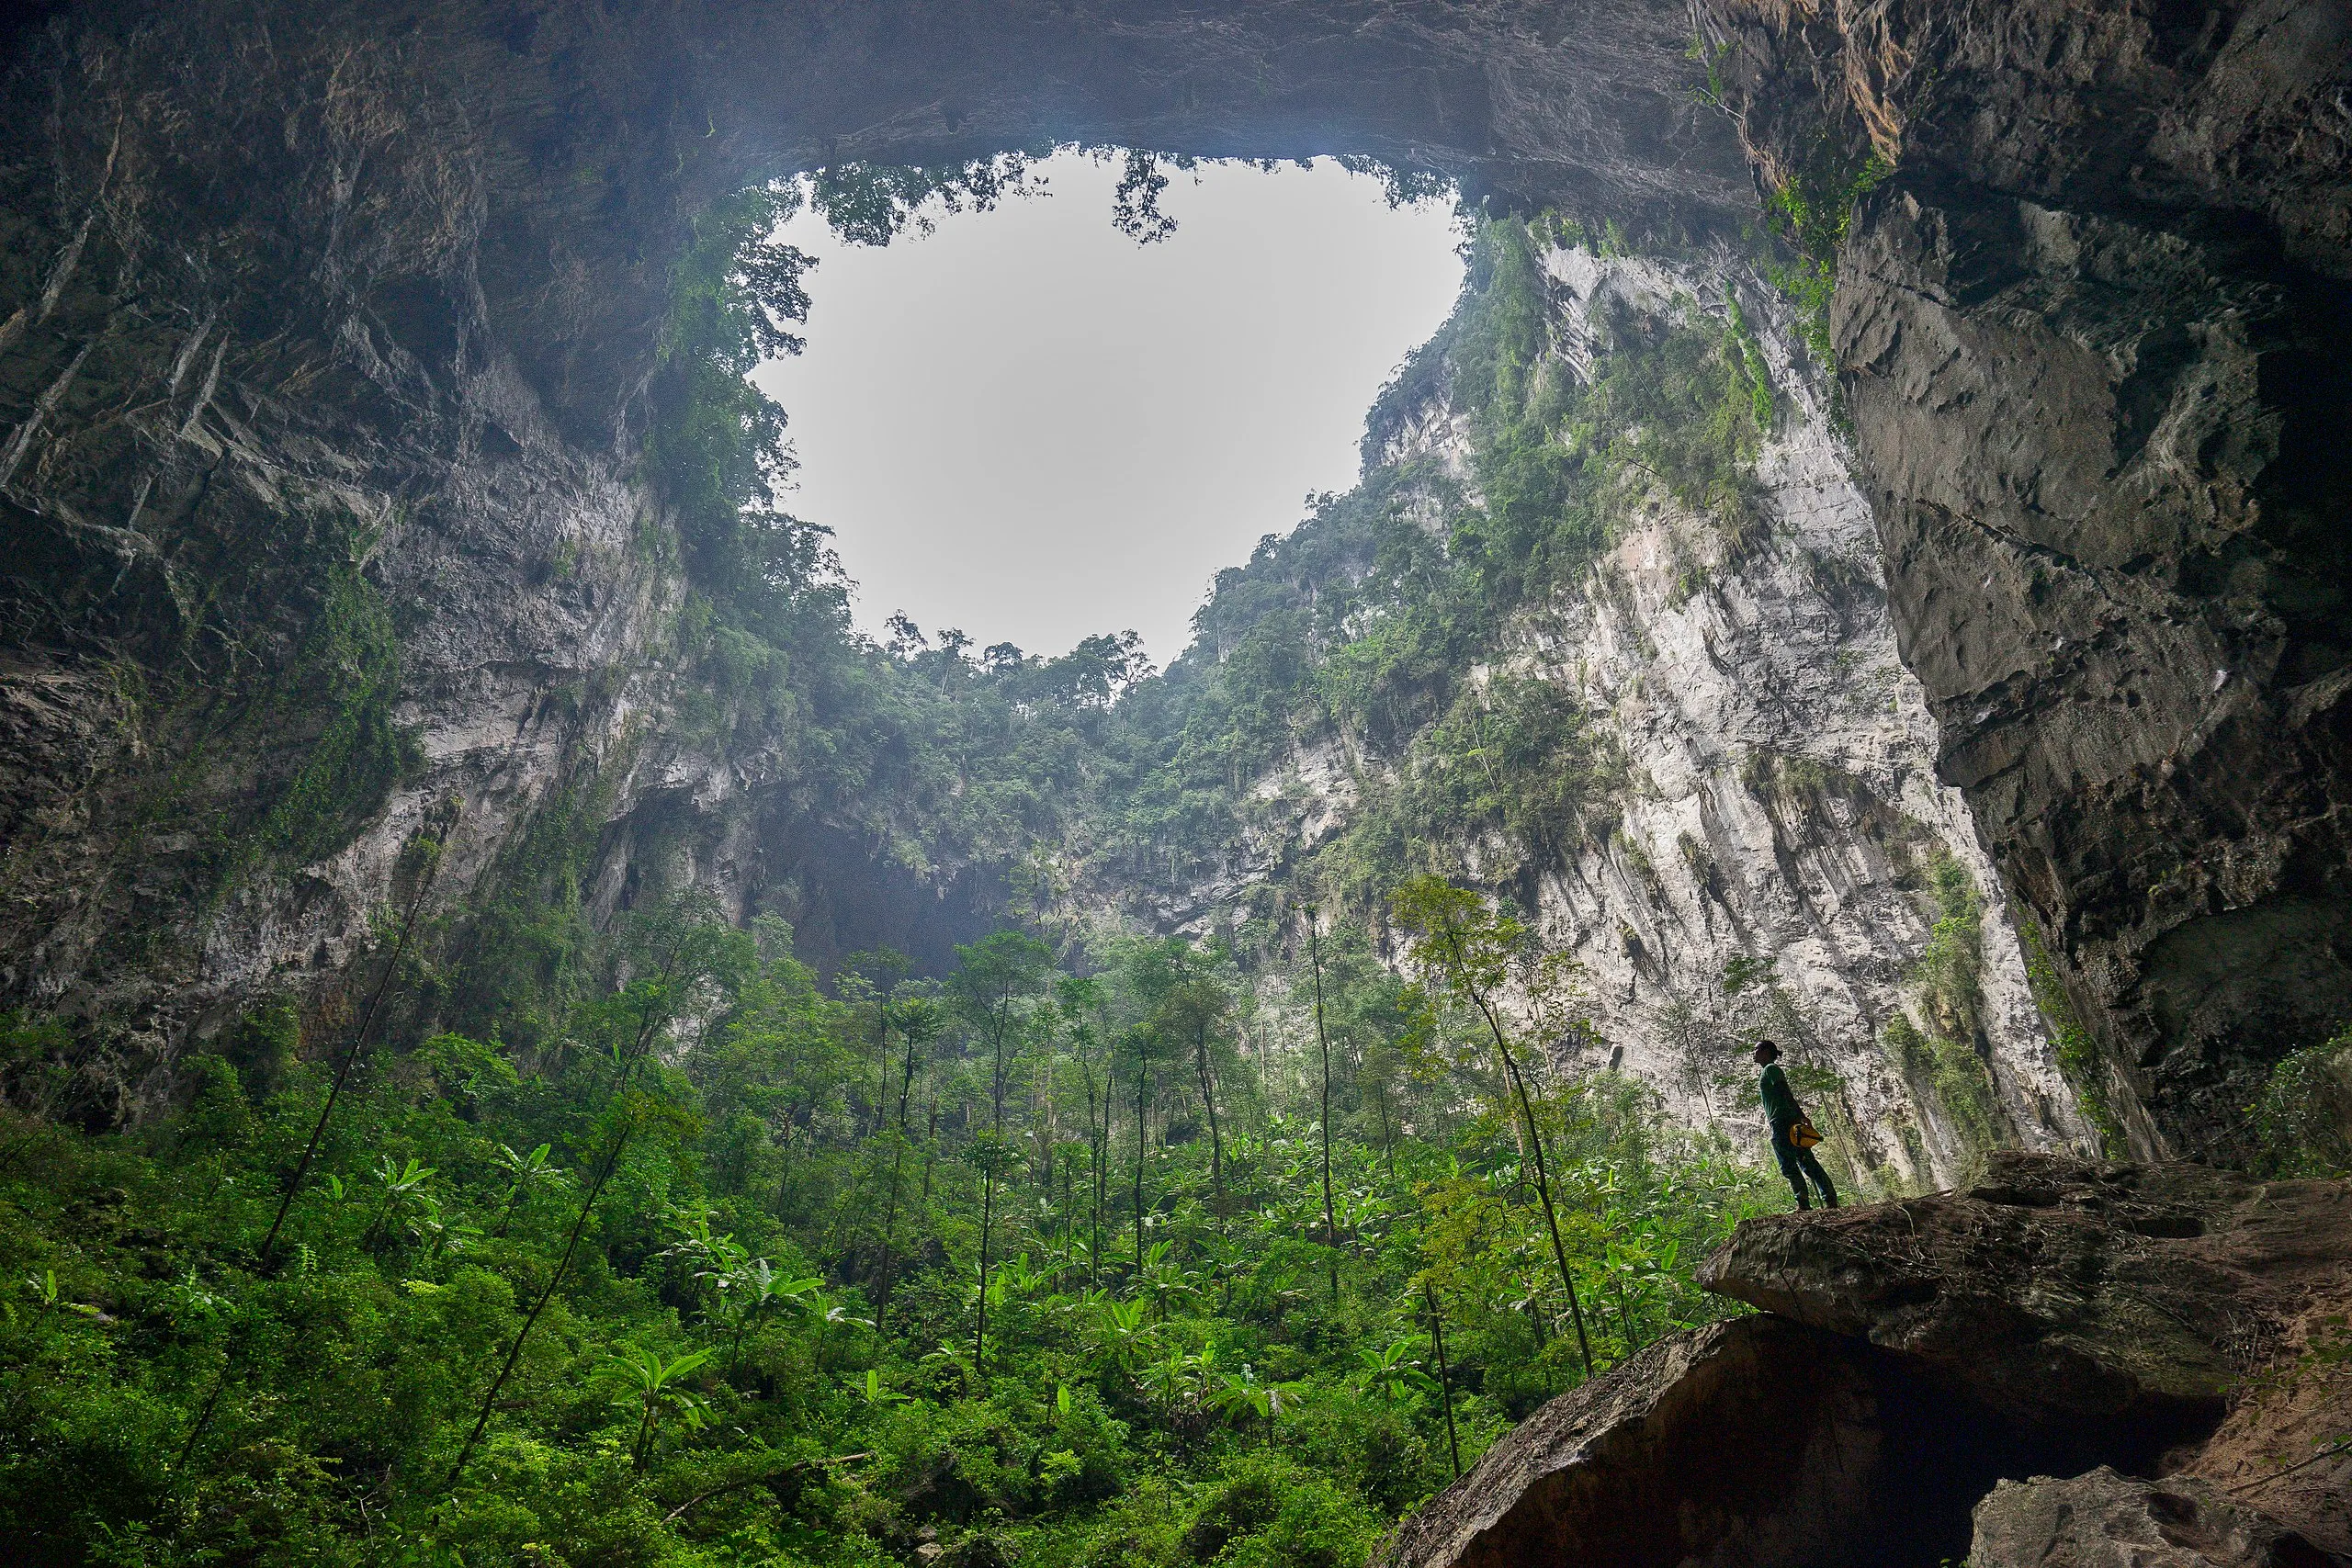 Sinkhole and jungle inside the Hong son doong cave